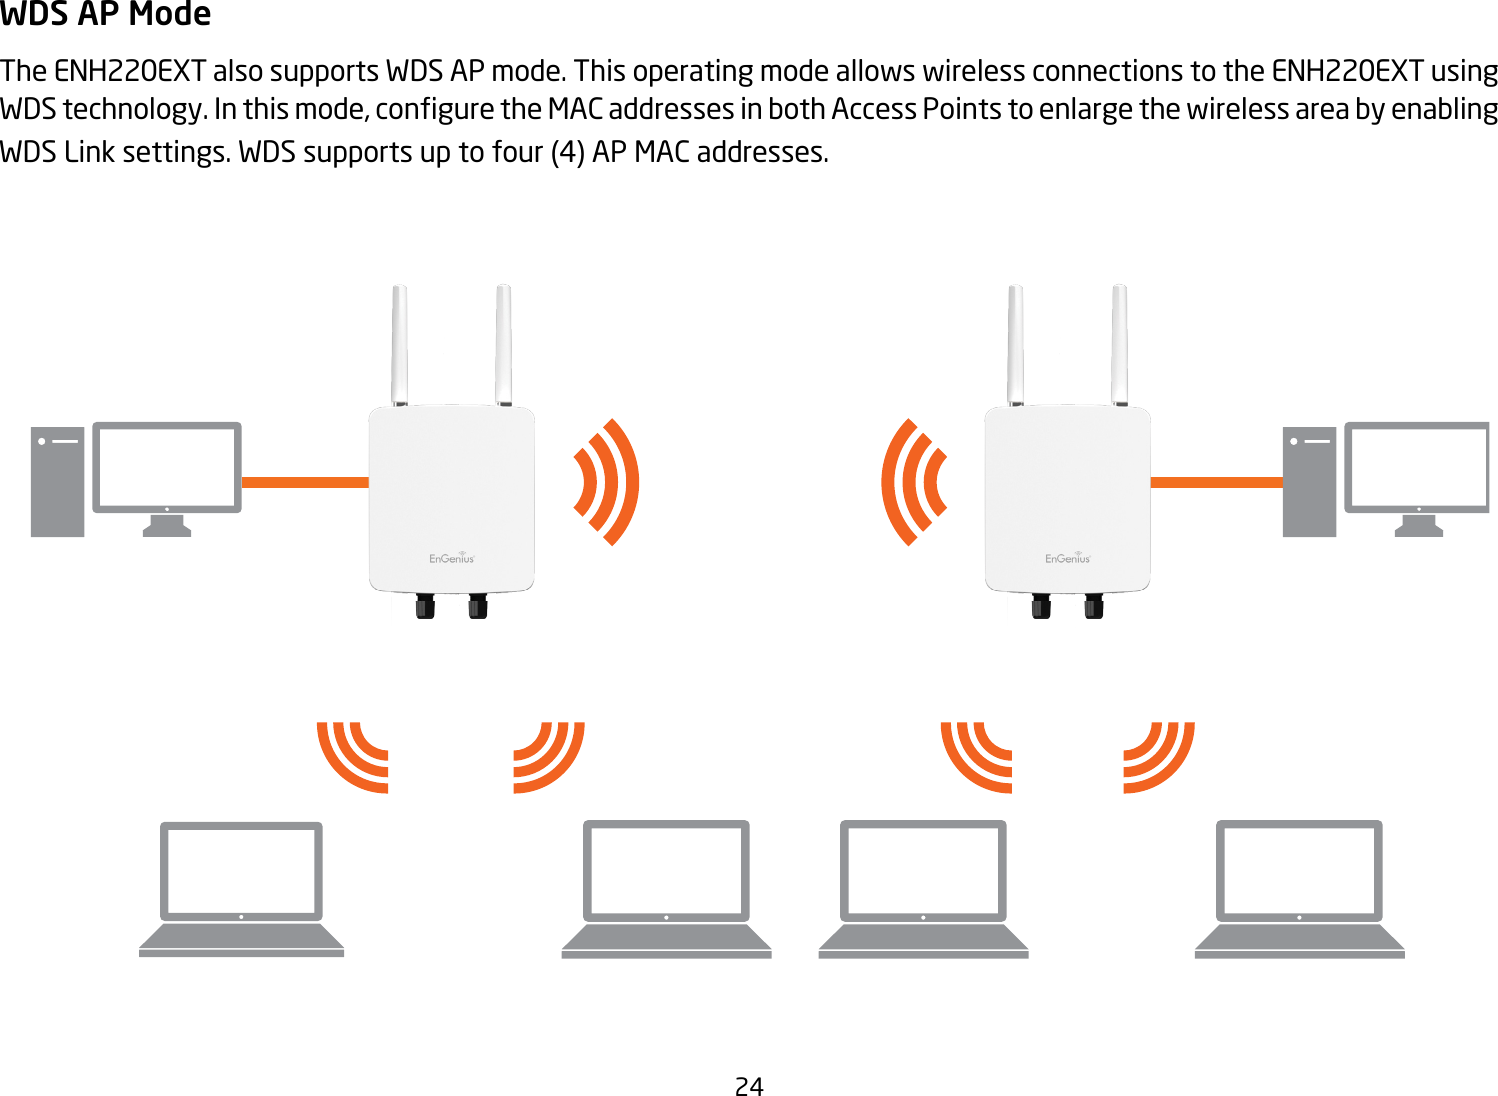 24WDS AP ModeThe ENH220EXT also supports WDS AP mode. This operating mode allows wireless connections to the ENH220EXT using WDStechnology.Inthismode,conguretheMACaddressesinbothAccessPointstoenlargethewirelessareabyenablingWDSLinksettings.WDSsupportsuptofour(4)APMACaddresses.